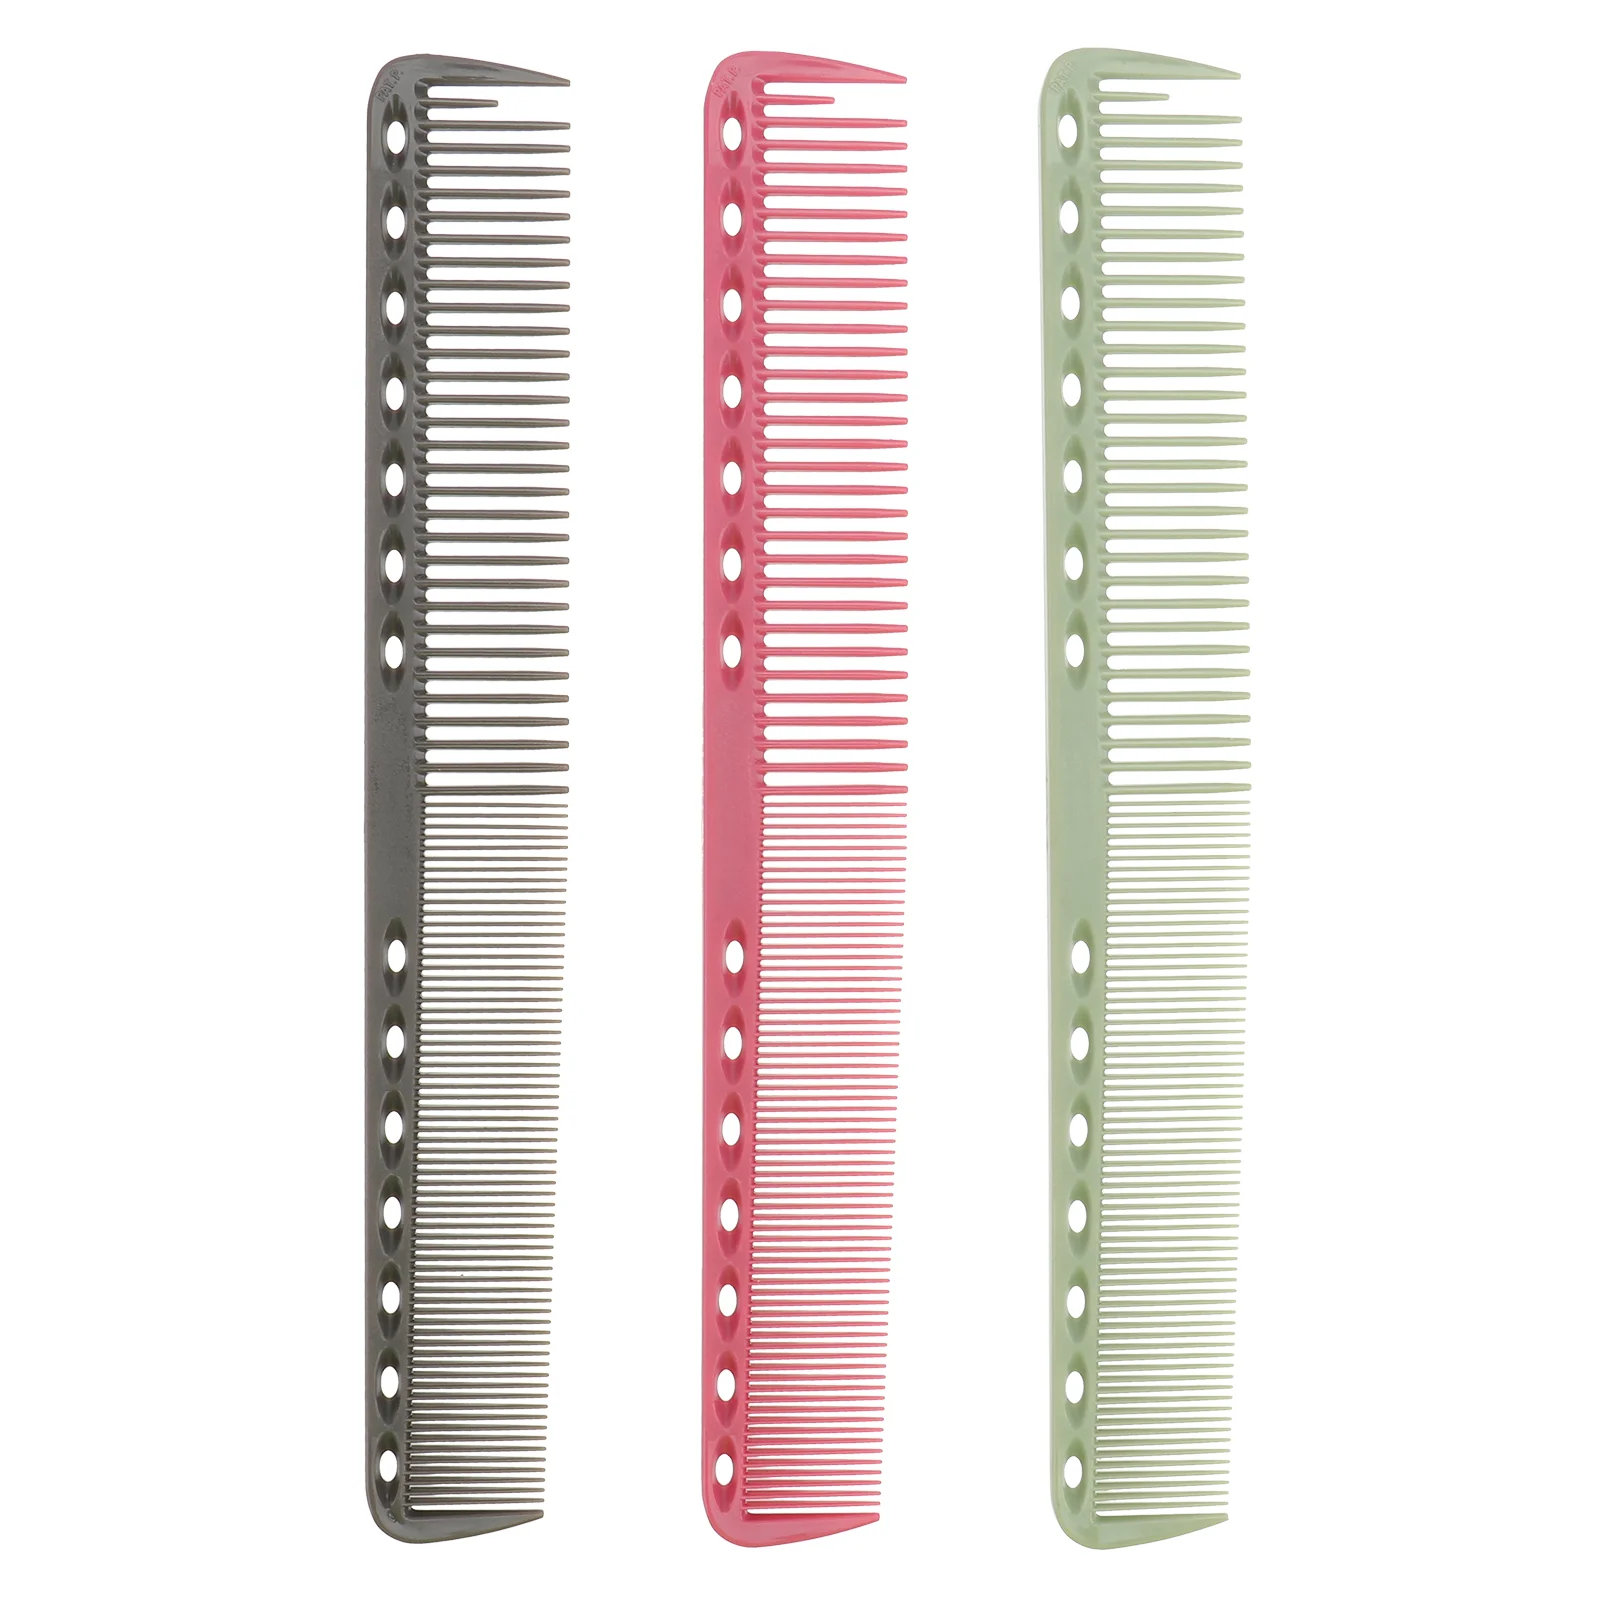 

Comb Hair Combs Set Women Barber Haircut Hairdressing Anti Static Teeth Portable Salon Professional Stylist Cutting Sturdy